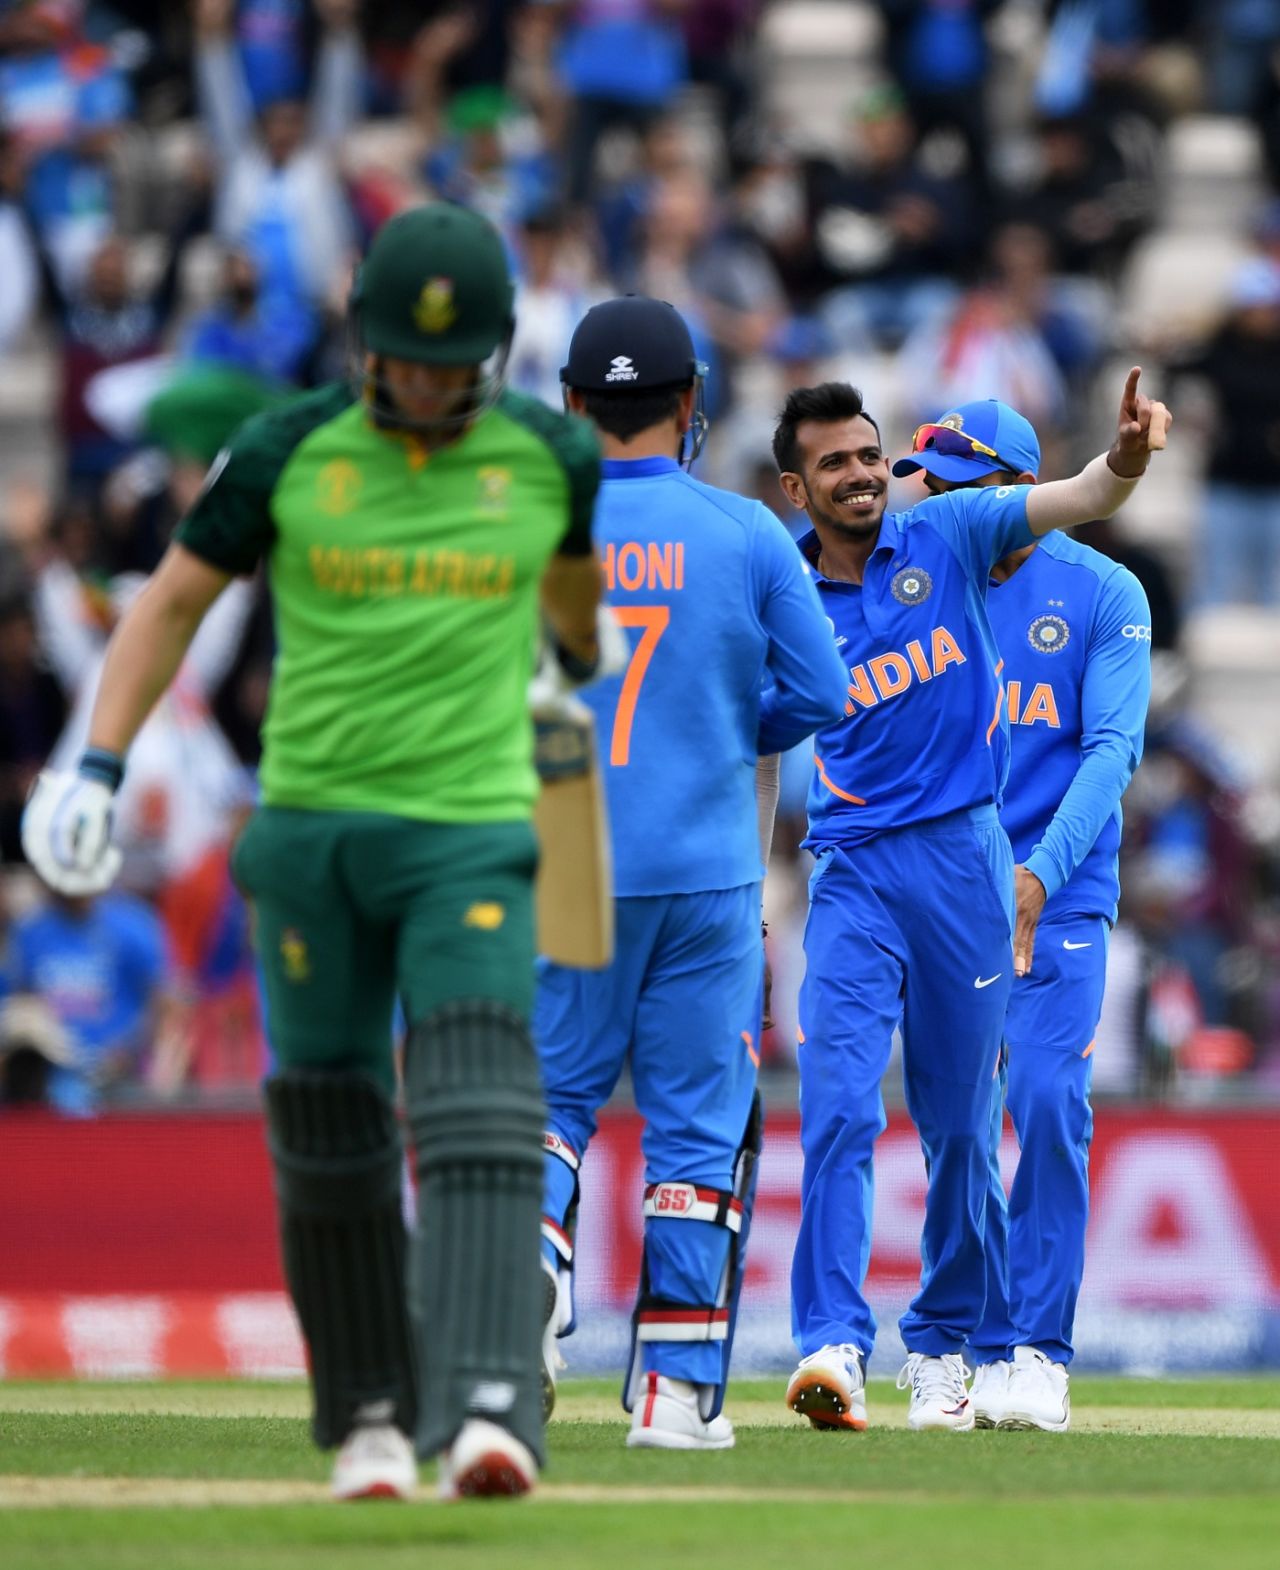 Yuzvendra Chahal celebrates after taking the wicket of David Miller, India v South Africa, Southampton, World Cup 2019, June 5, 2019